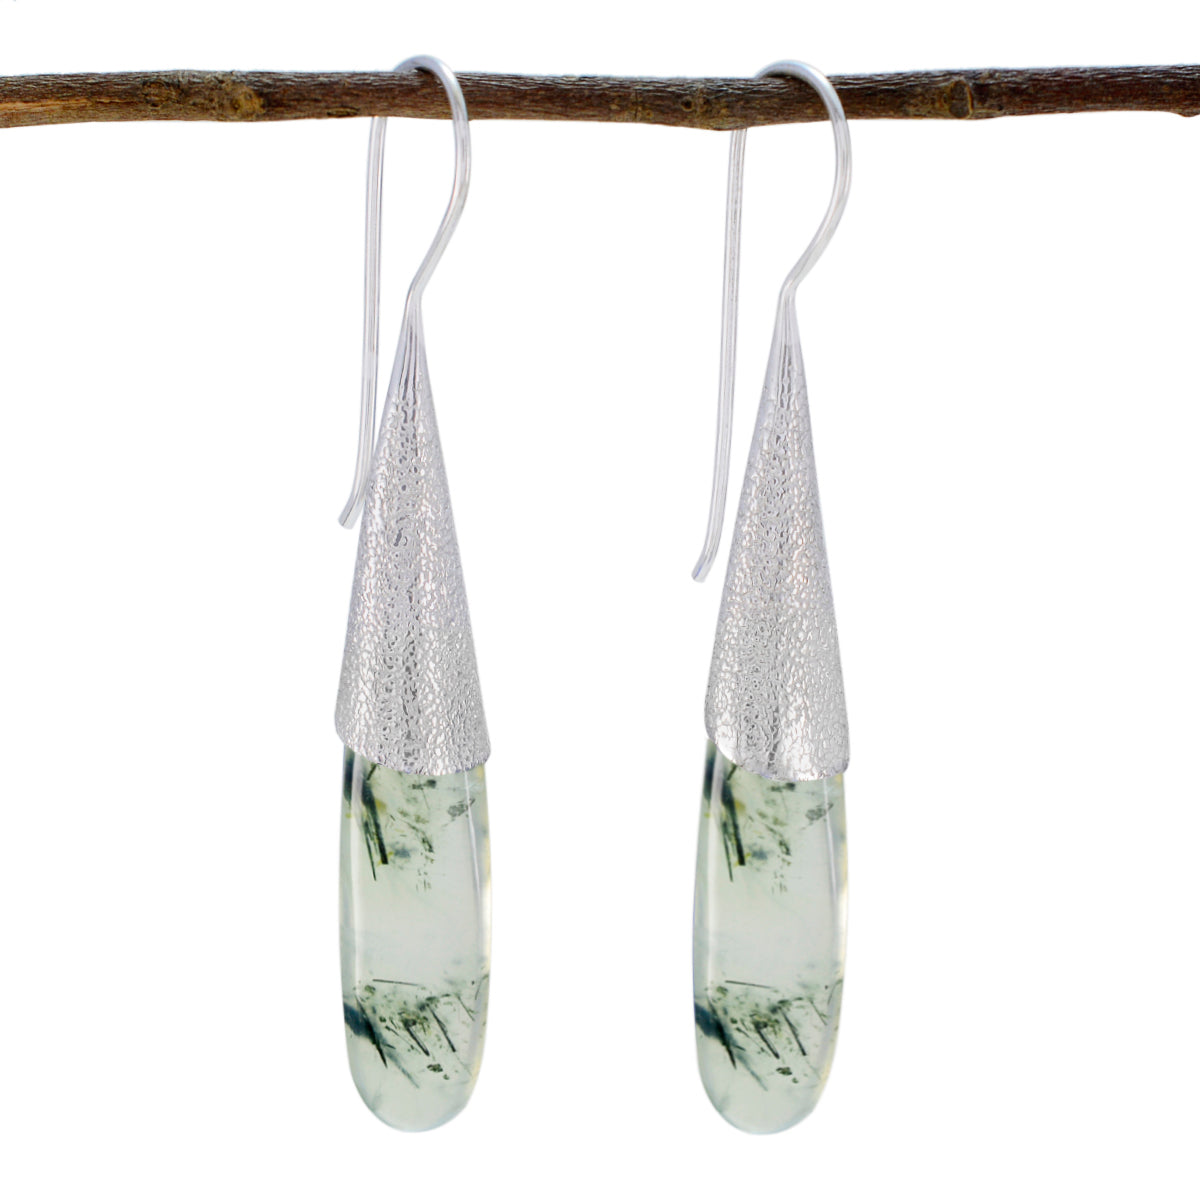 Riyo Real Gemstones fancy Cabochon Light Green Prehnite Silver Earrings gift for mother's day